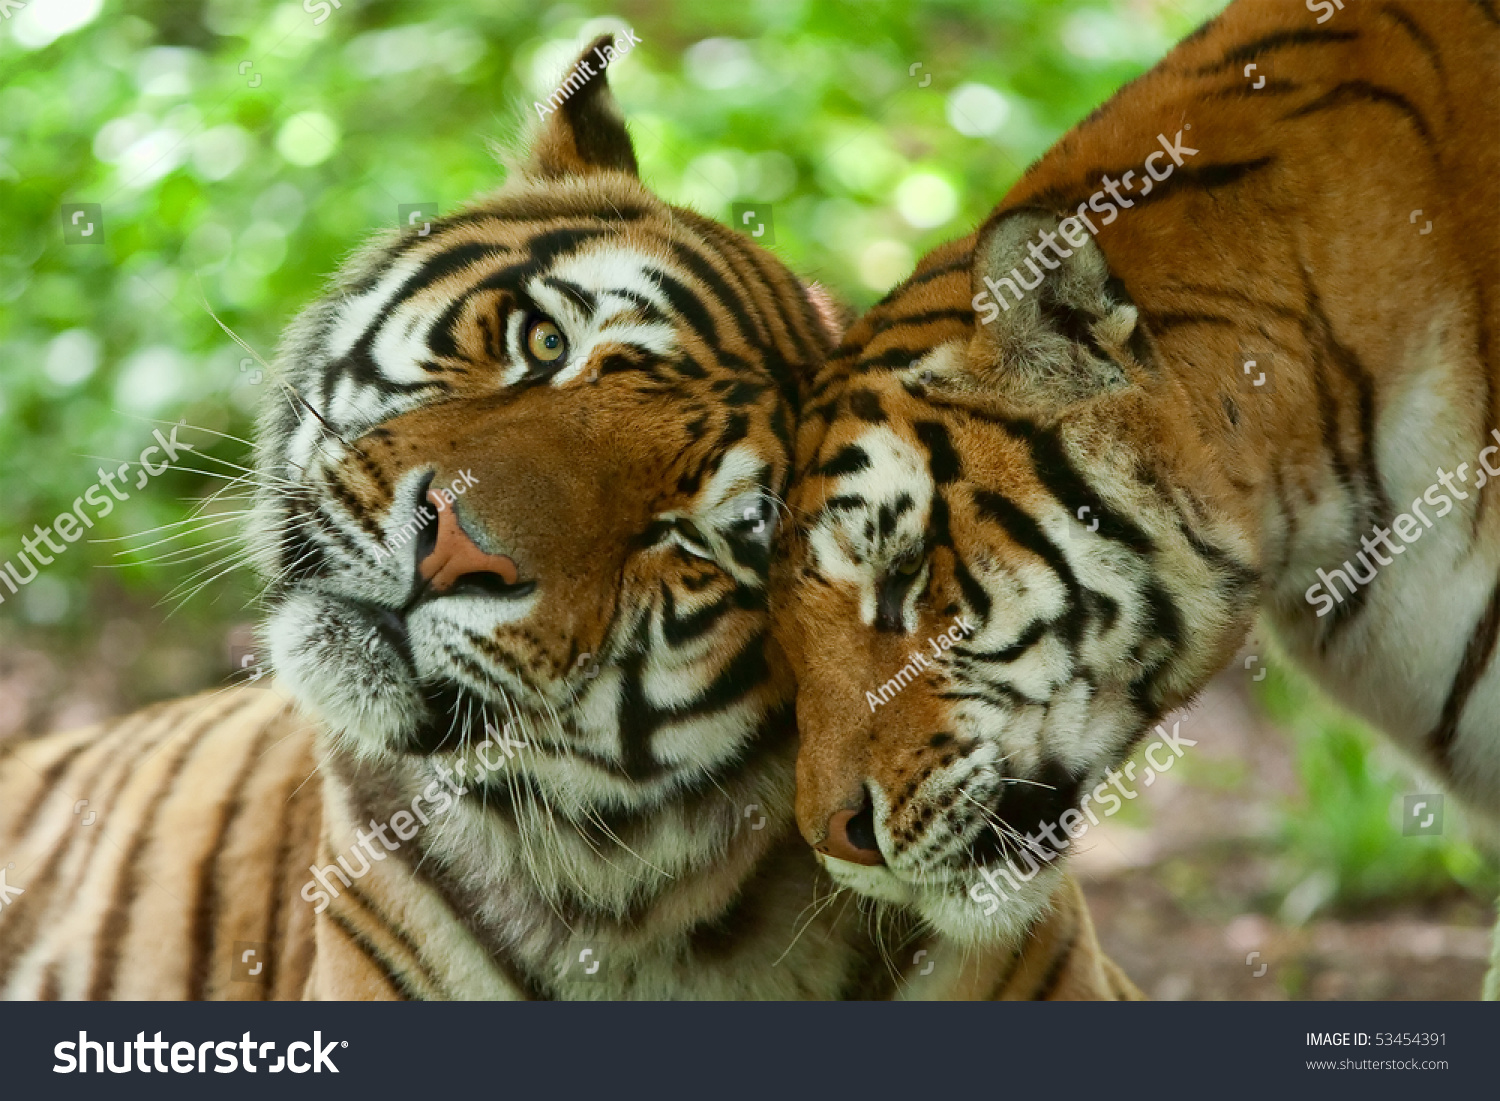 A loving tiger couple shares a tender kiss, expressing deep emotions in the wild nature, symbolizing the bond of family and wildlife. #53454391